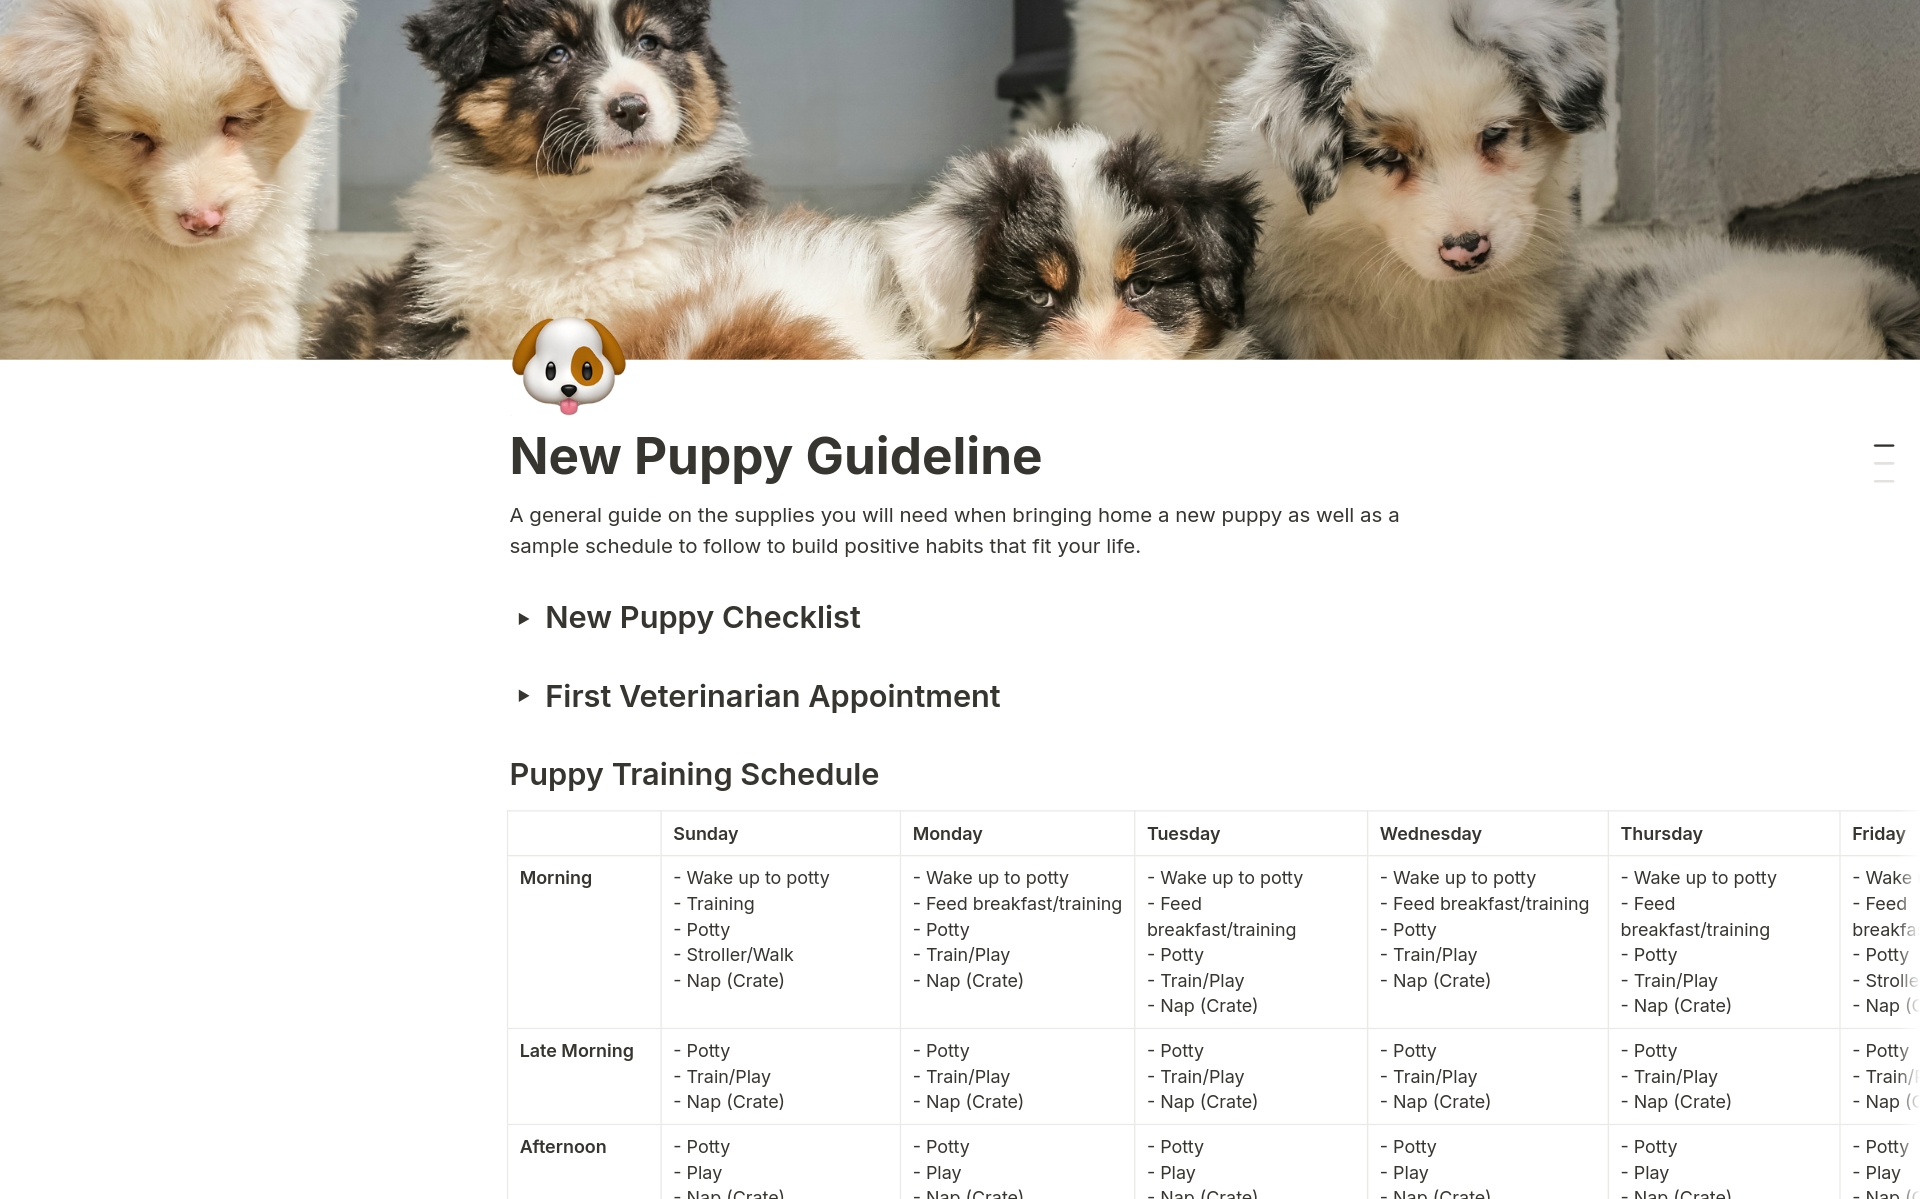 A general guide on bringing home a new puppy.